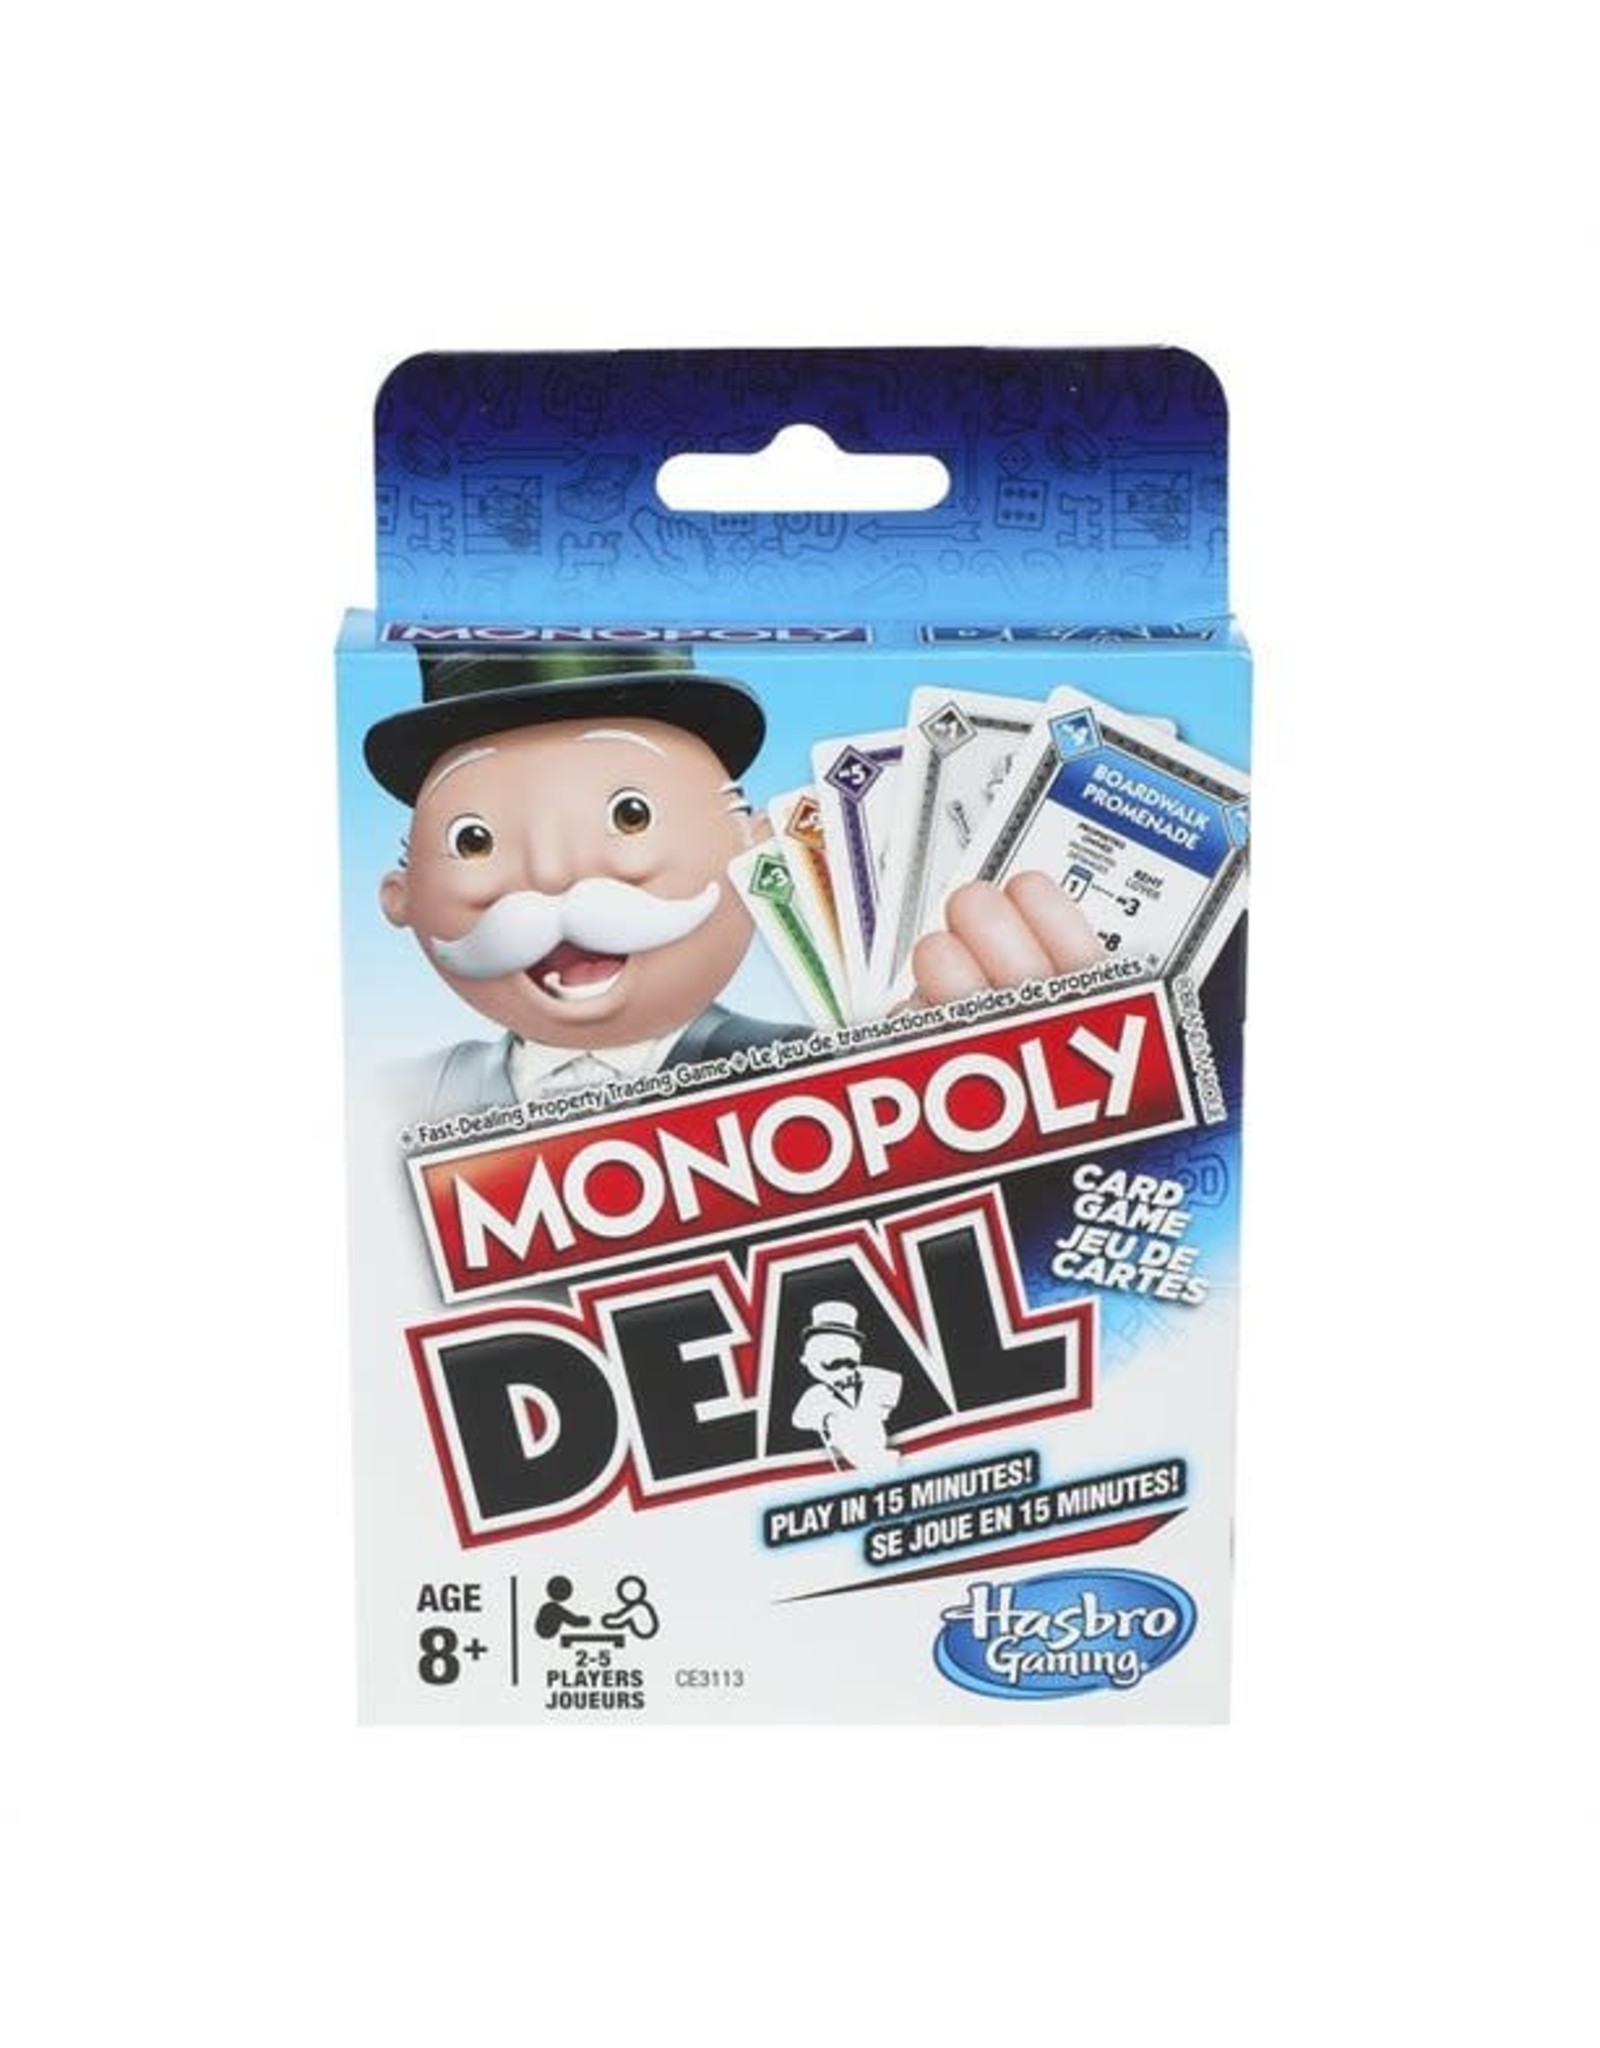 Mattel games Monopoly deal - The card game